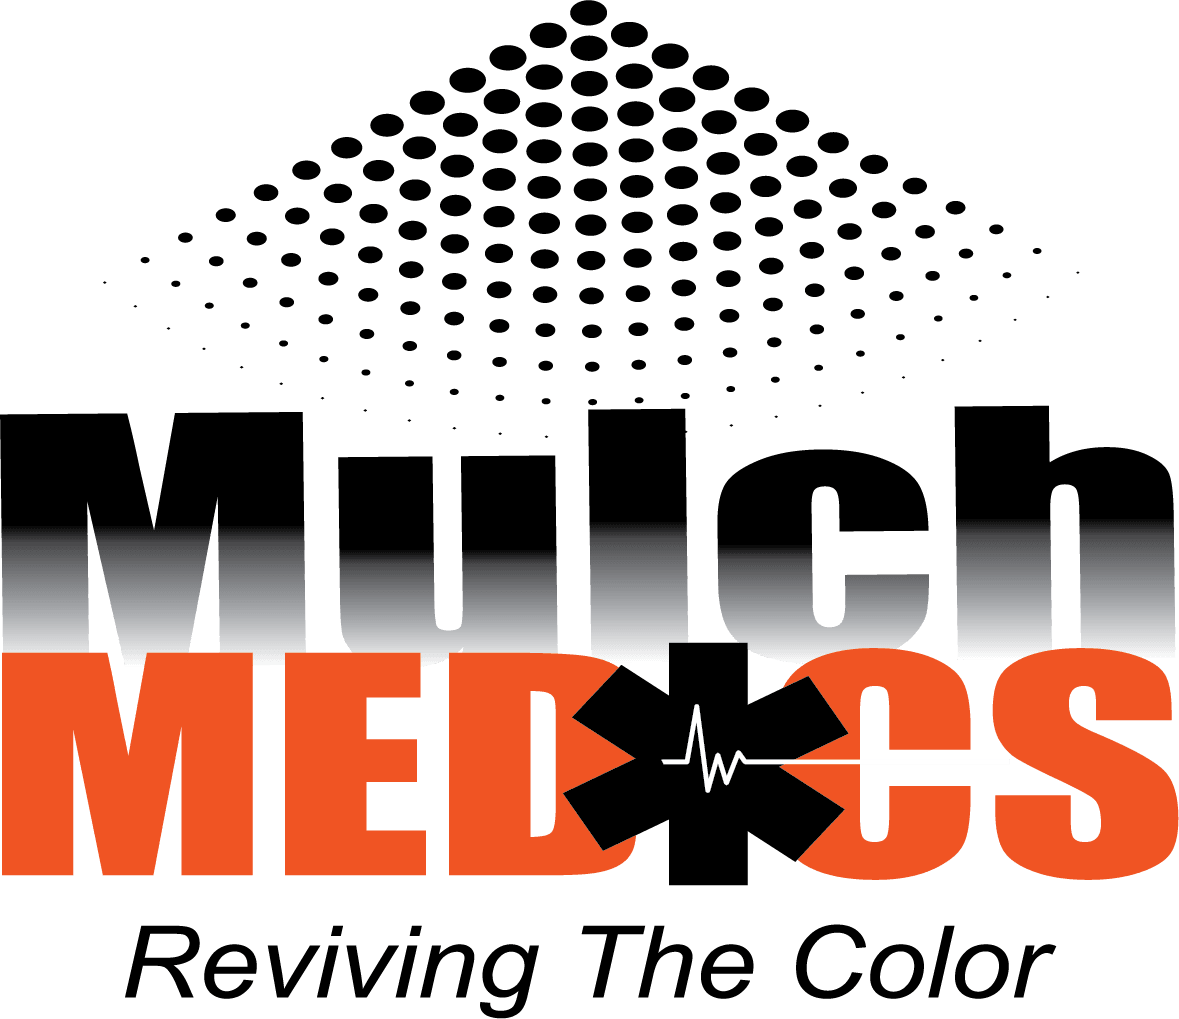 This is the Mulch Medics logo.